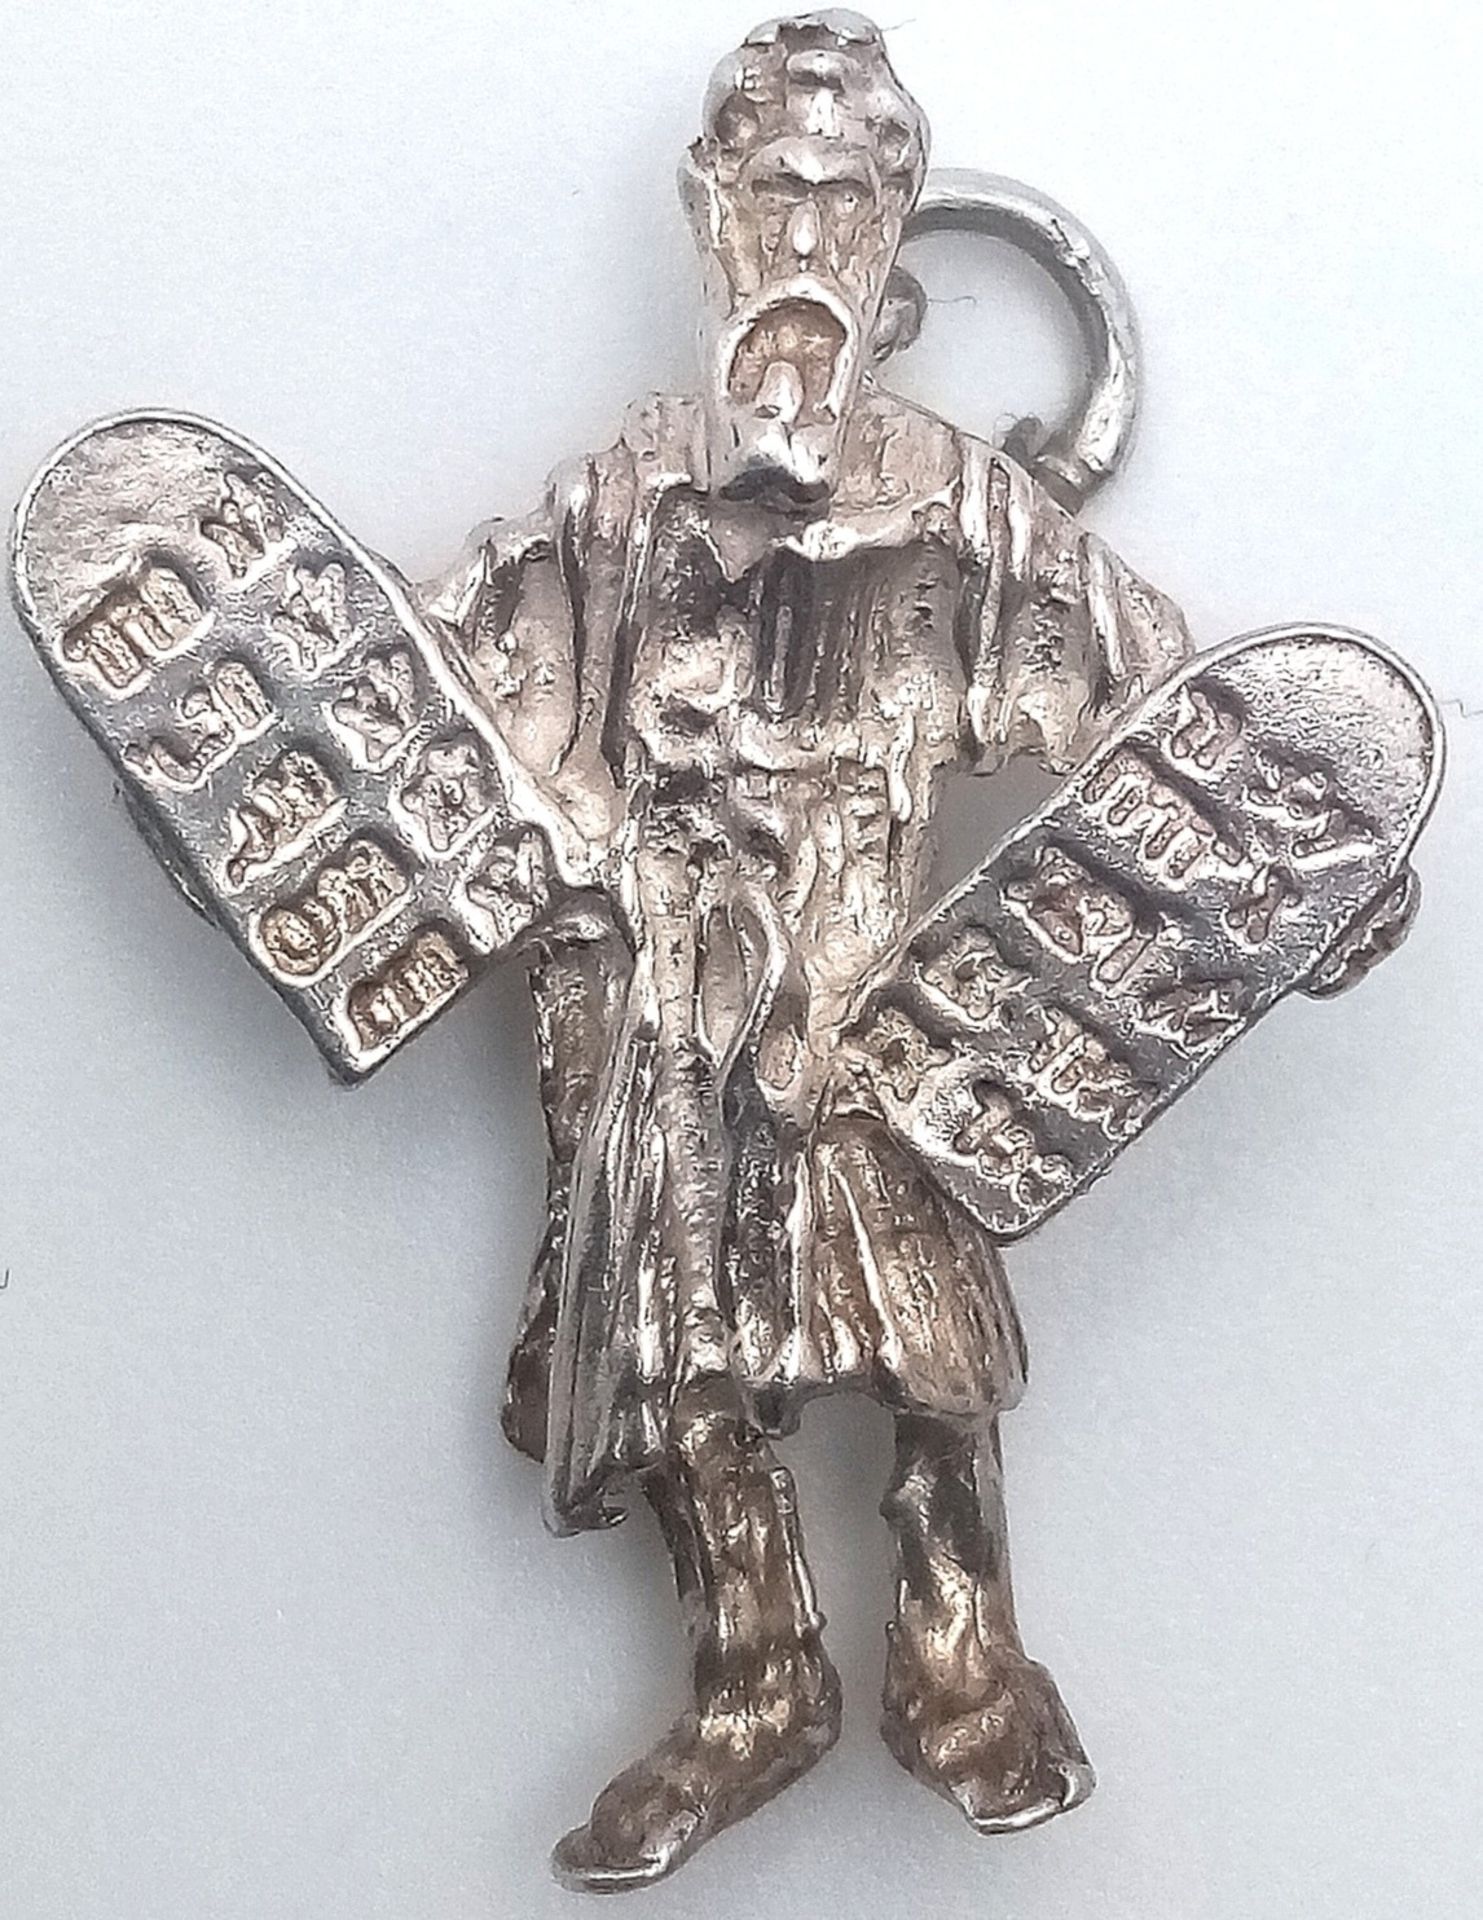 A STERLING SILVER MOSES WITH THE 10 COMMANDMENTS CHARM. 2.5cm length, 4g weight. Ref: SC 8113